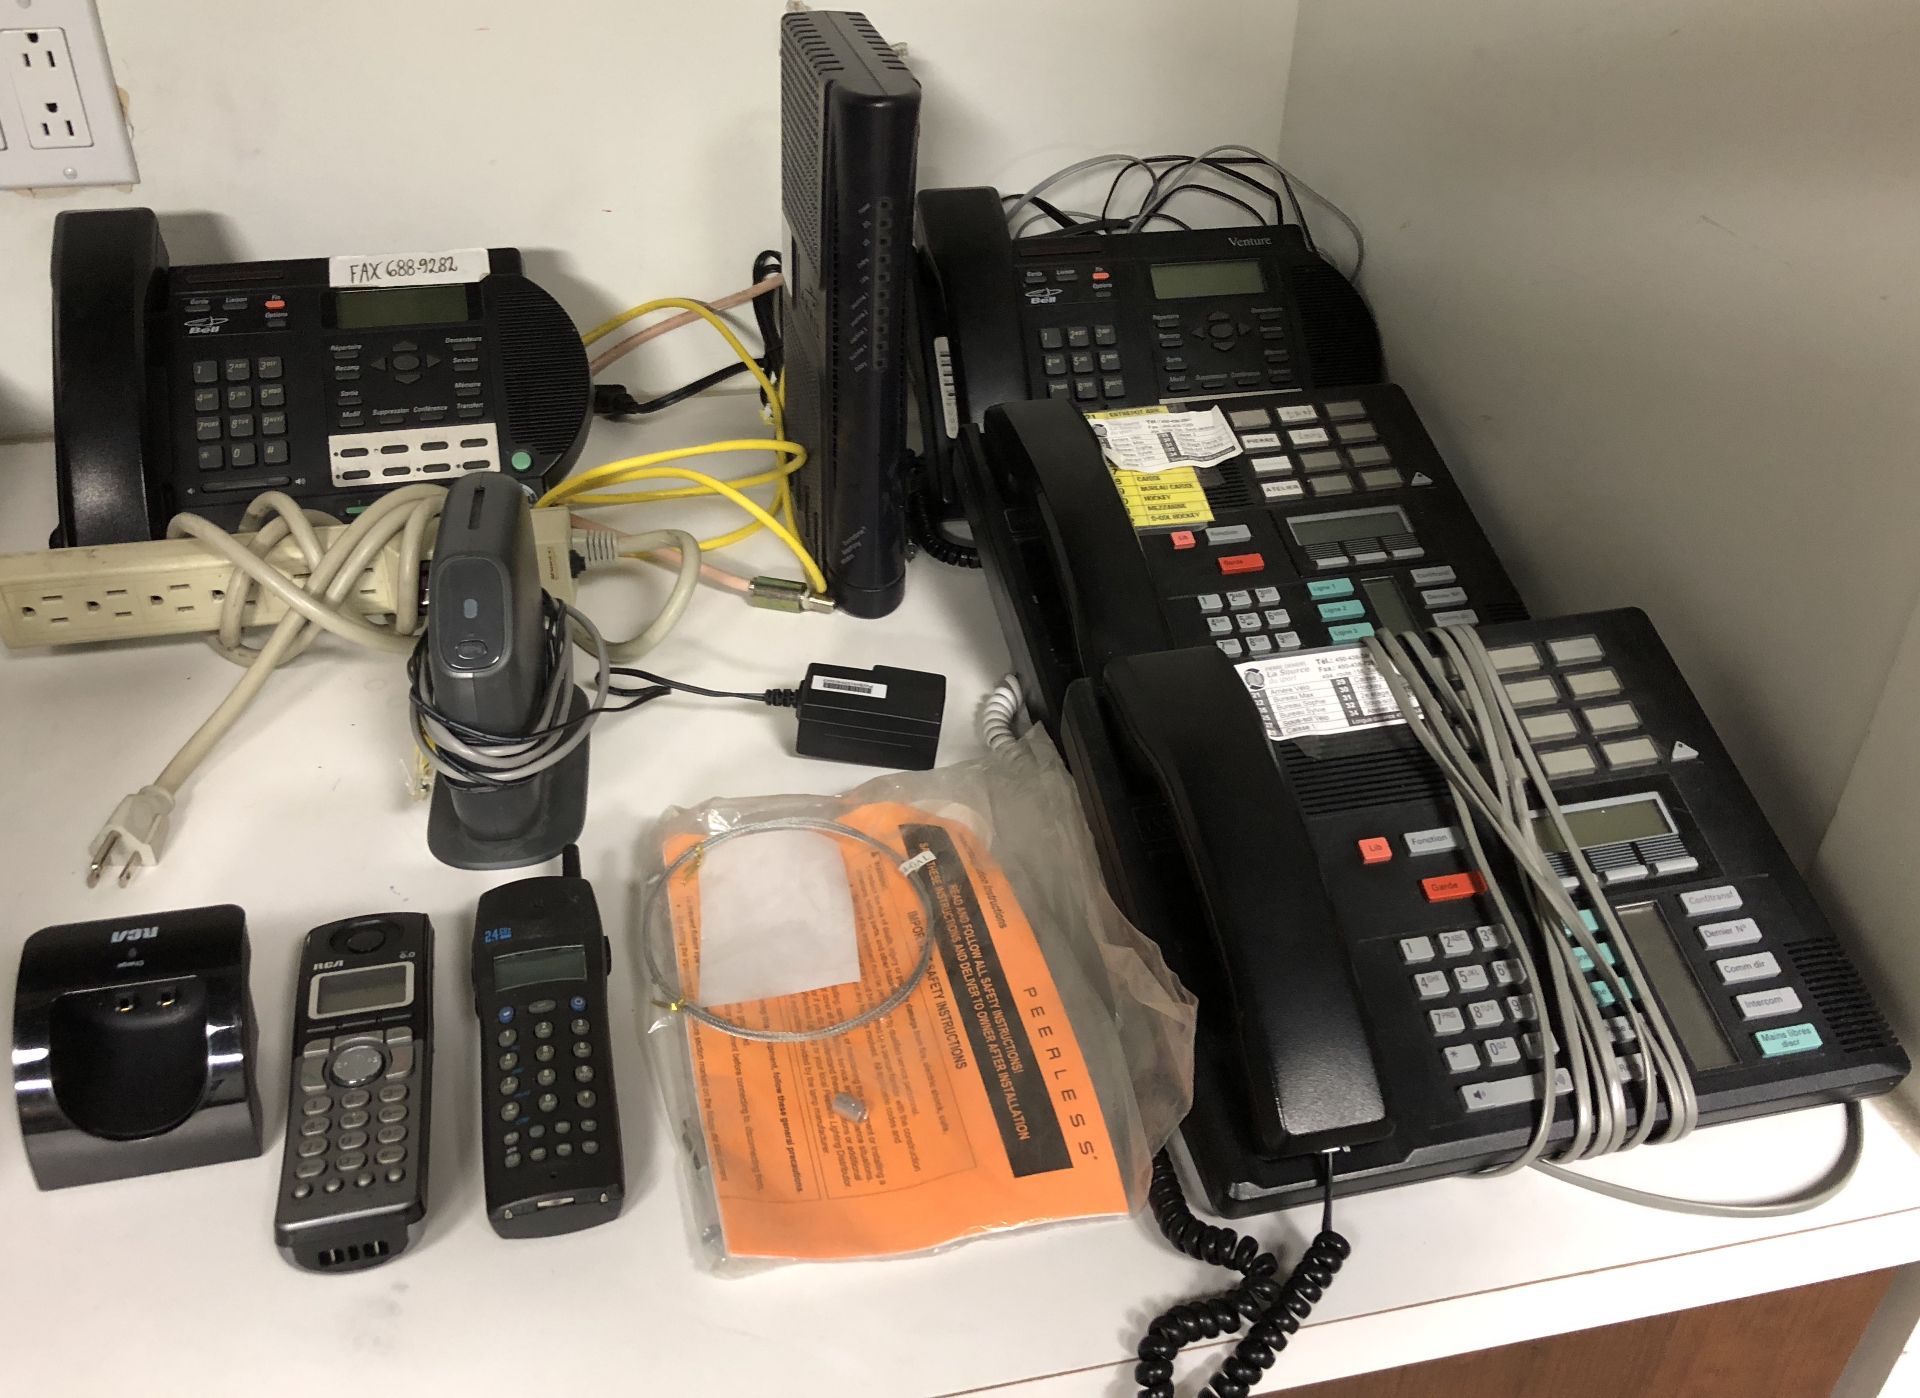 LOT OF OFFICE PHONES AND SMALL ROUTER, PLUS MISC ITEMS